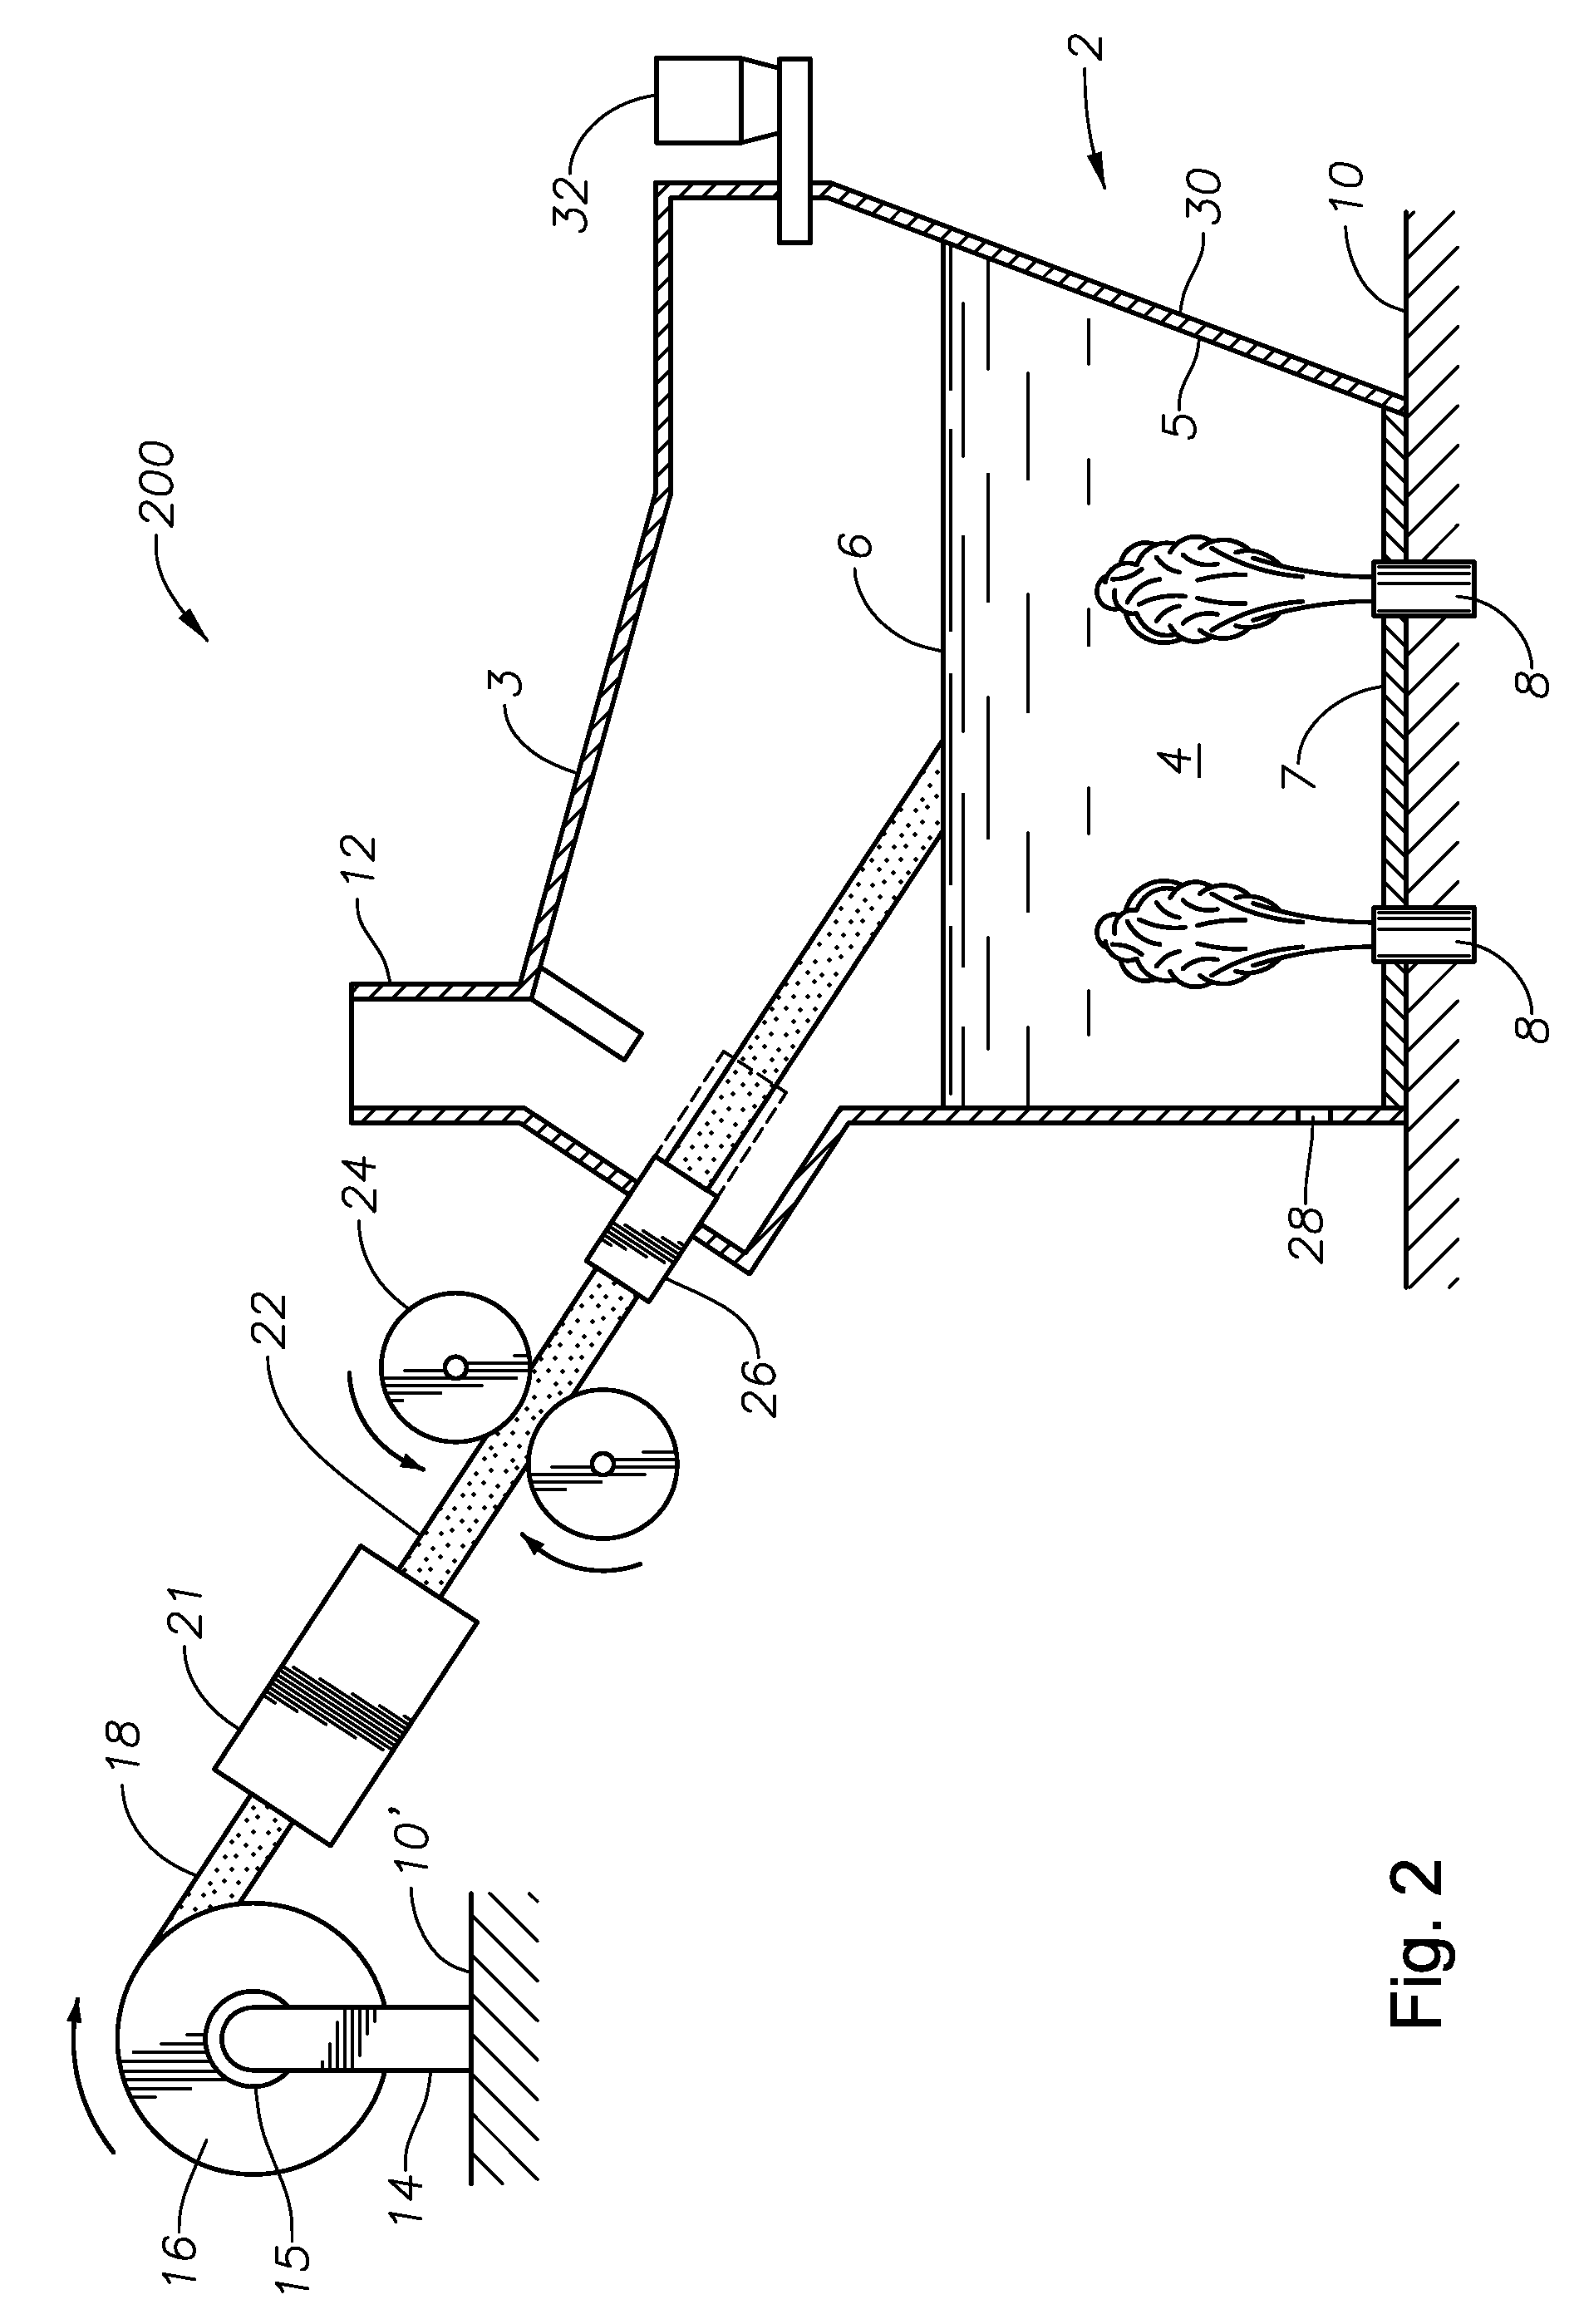 Methods and apparatus for recycling glass products using submerged combustion